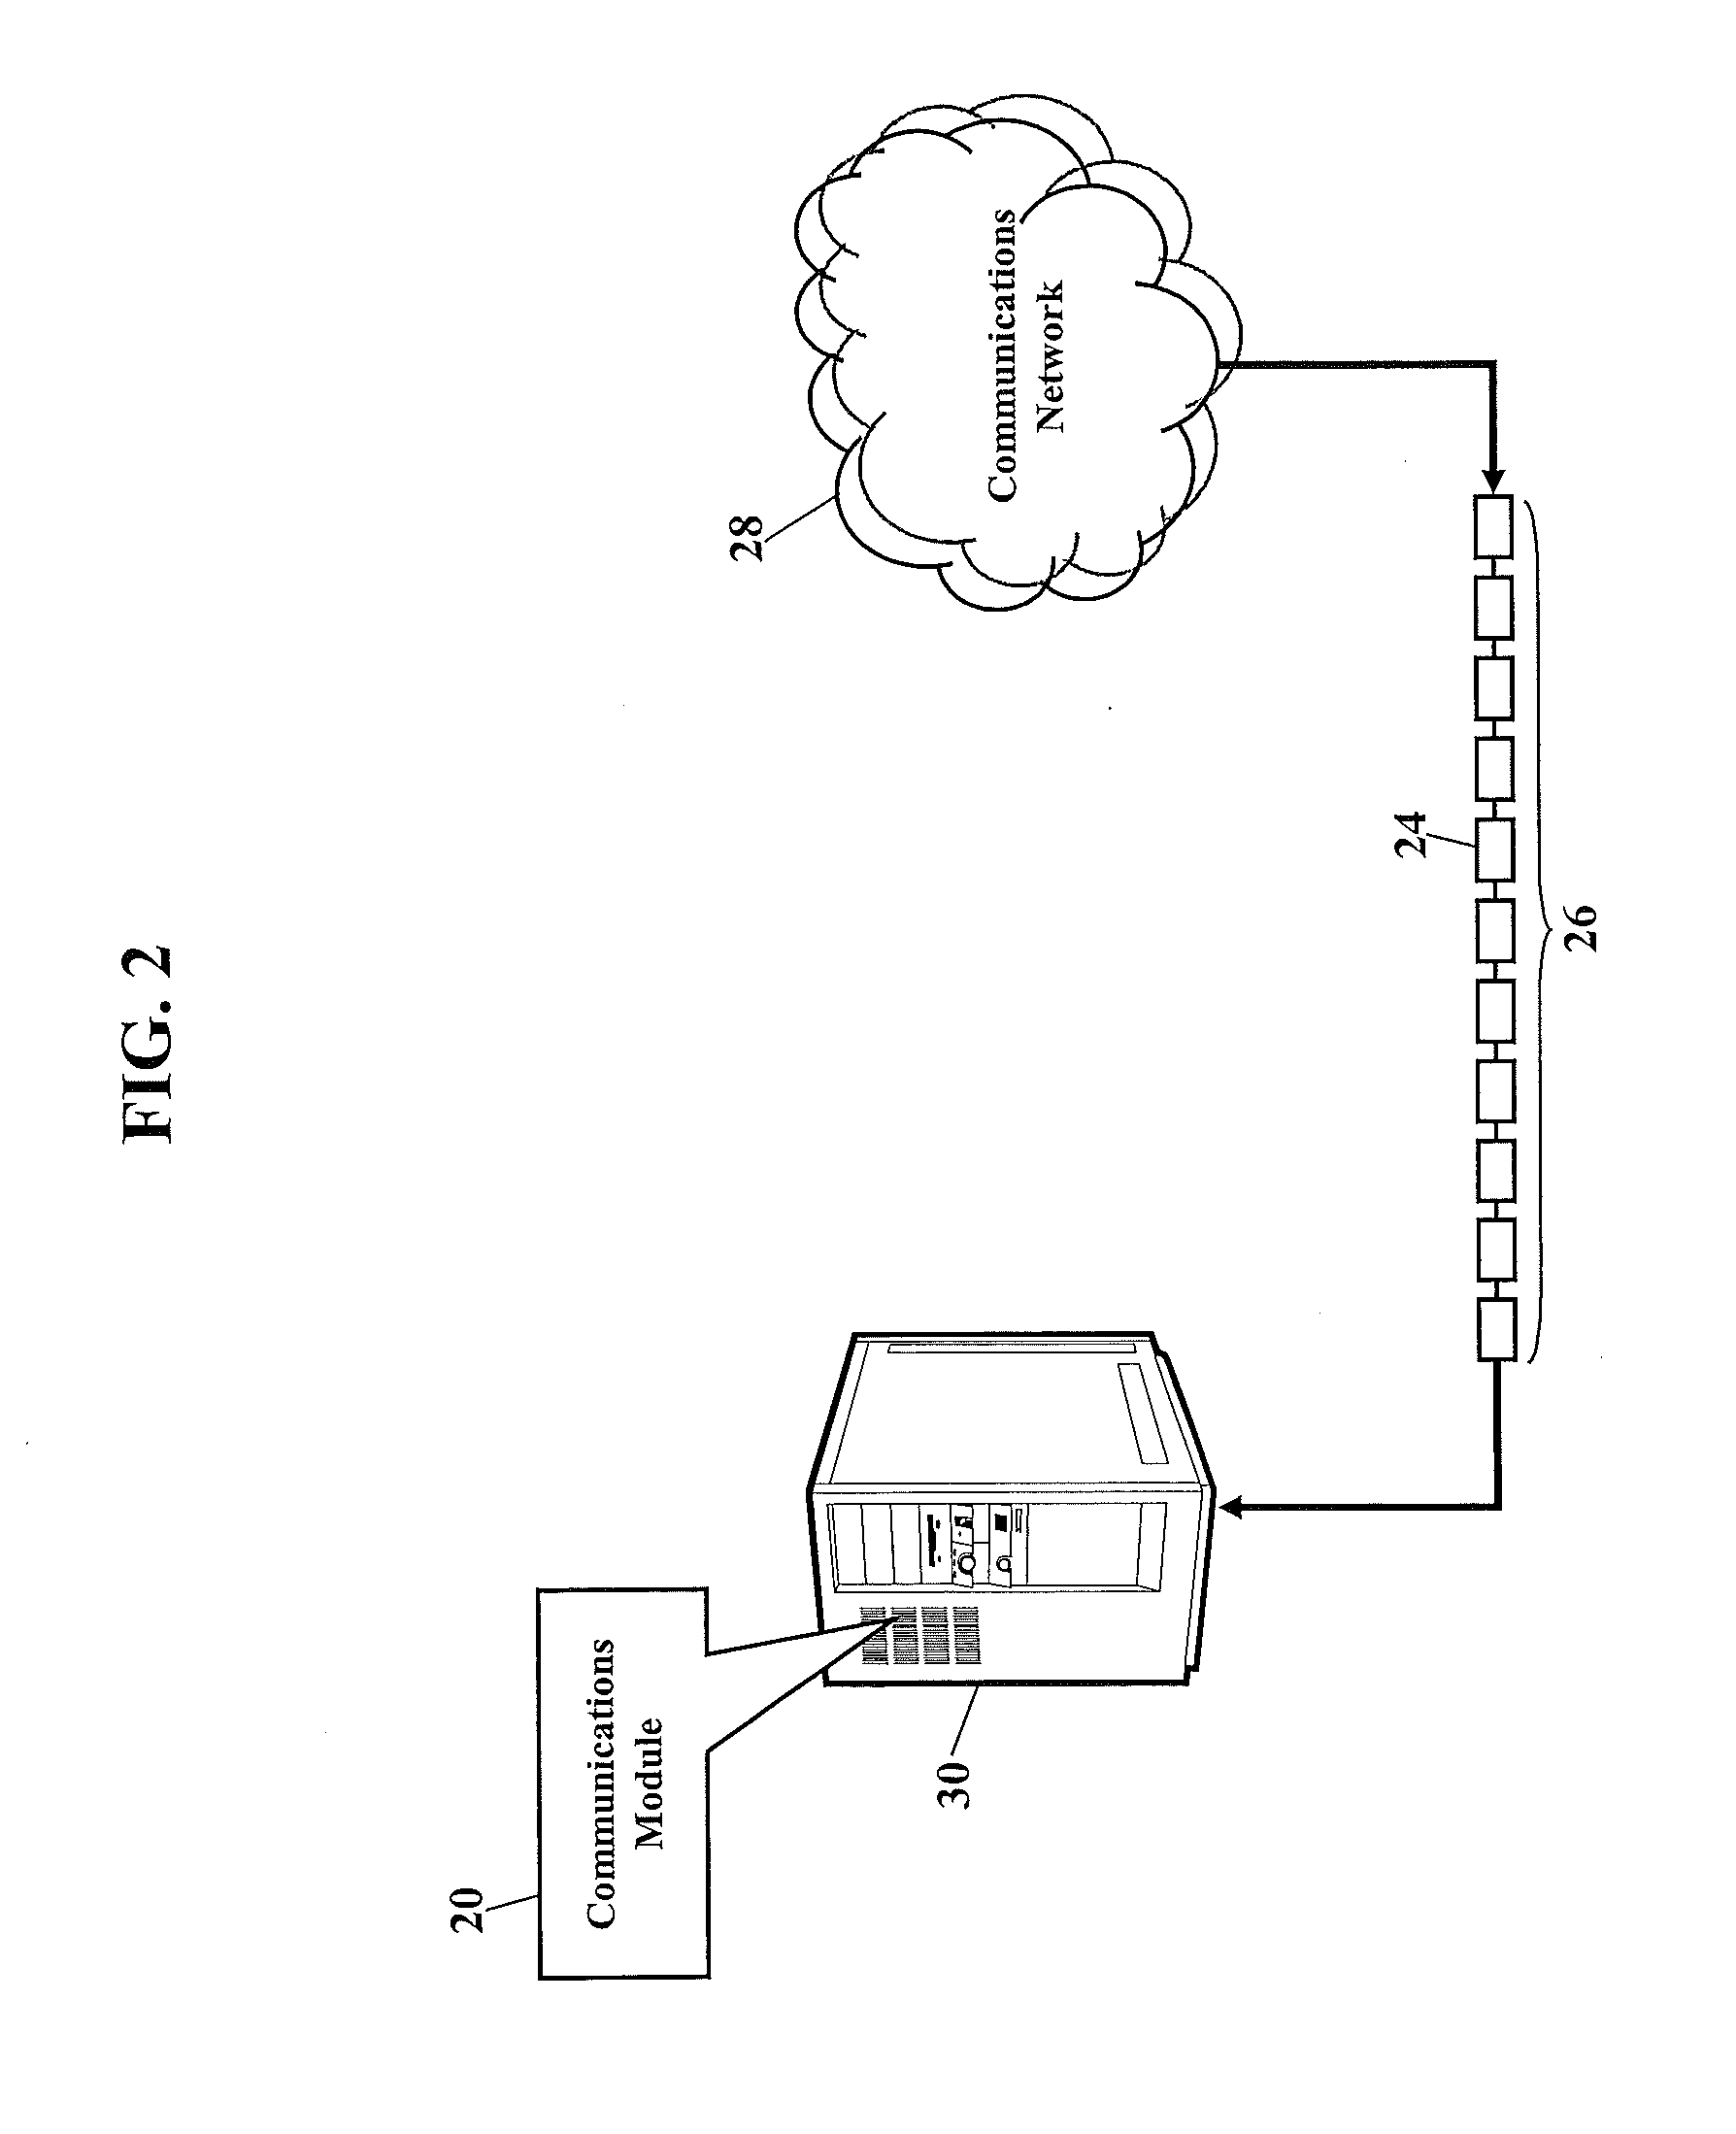 Detection of encrypted packet streams using feedback probing